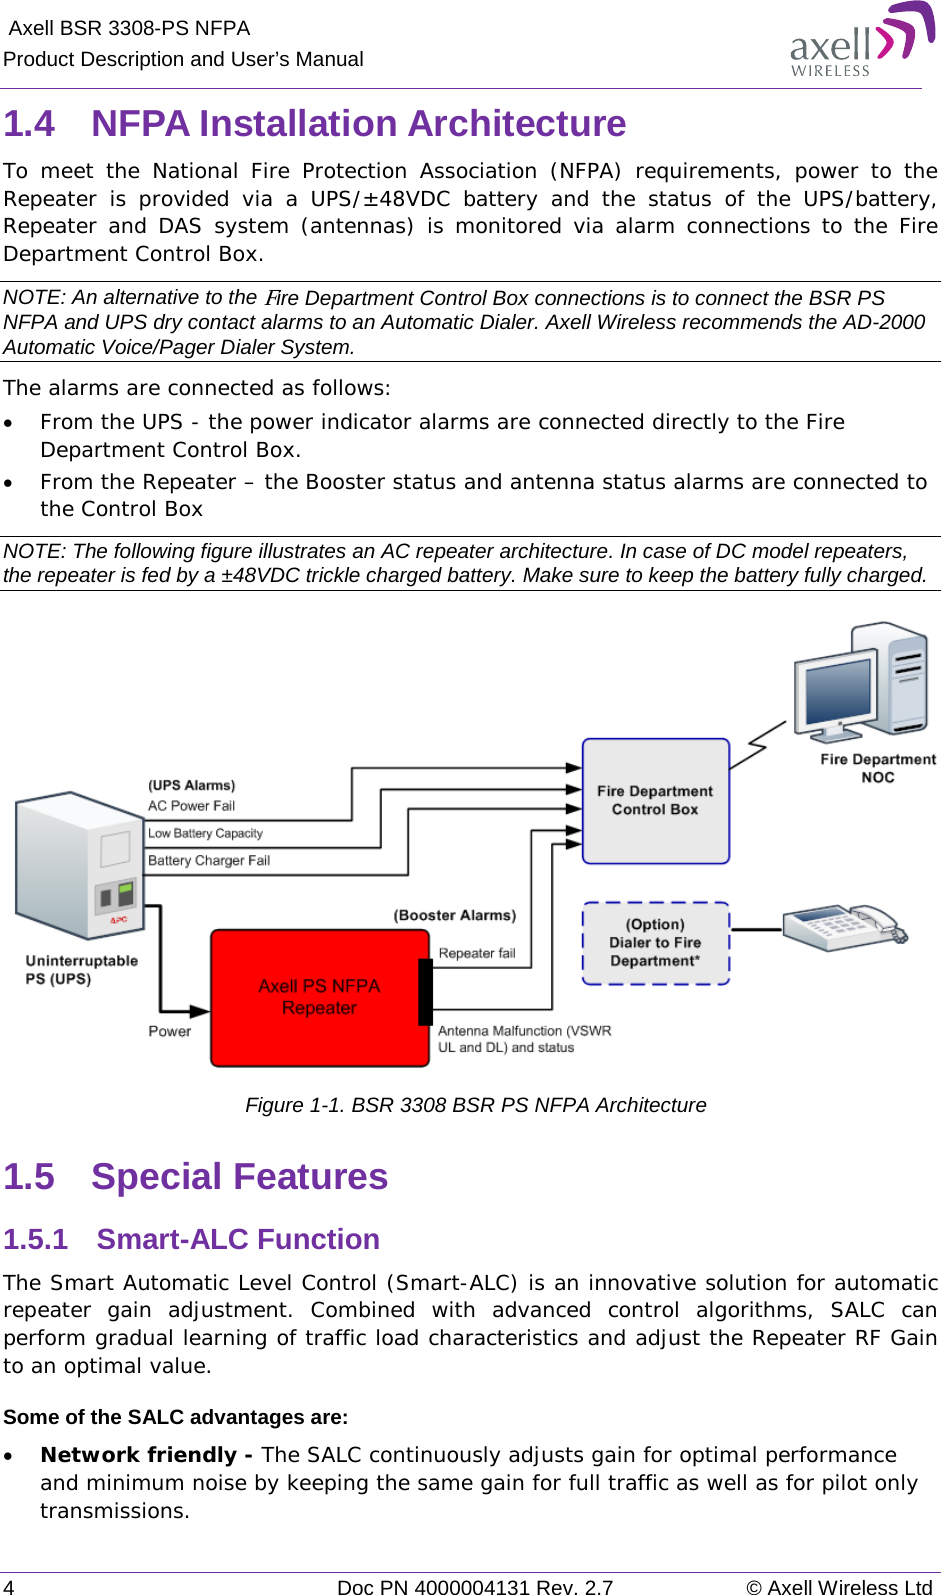  Axell BSR 3308-PS NFPA Product Description and User’s Manual 4  Doc PN 4000004131 Rev. 2.7 © Axell Wireless Ltd  1.4  NFPA Installation Architecture To meet the National Fire Protection Association (NFPA) requirements, power to the Repeater is provided via a UPS/±48VDC battery and the status of the UPS/battery, Repeater and DAS system (antennas) is monitored via alarm connections to the Fire Department Control Box.  NOTE: An alternative to the Fire Department Control Box connections is to connect the BSR PS NFPA and UPS dry contact alarms to an Automatic Dialer. Axell Wireless recommends the AD-2000 Automatic Voice/Pager Dialer System. The alarms are connected as follows: • From the UPS - the power indicator alarms are connected directly to the Fire Department Control Box. • From the Repeater – the Booster status and antenna status alarms are connected to the Control Box NOTE: The following figure illustrates an AC repeater architecture. In case of DC model repeaters, the repeater is fed by a ±48VDC trickle charged battery. Make sure to keep the battery fully charged.  Figure  1-1. BSR 3308 BSR PS NFPA Architecture 1.5  Special Features 1.5.1  Smart-ALC Function The Smart Automatic Level Control (Smart-ALC) is an innovative solution for automatic repeater gain adjustment. Combined with advanced control algorithms, SALC can perform gradual learning of traffic load characteristics and adjust the Repeater RF Gain to an optimal value.  Some of the SALC advantages are:  • Network friendly - The SALC continuously adjusts gain for optimal performance and minimum noise by keeping the same gain for full traffic as well as for pilot only transmissions.  